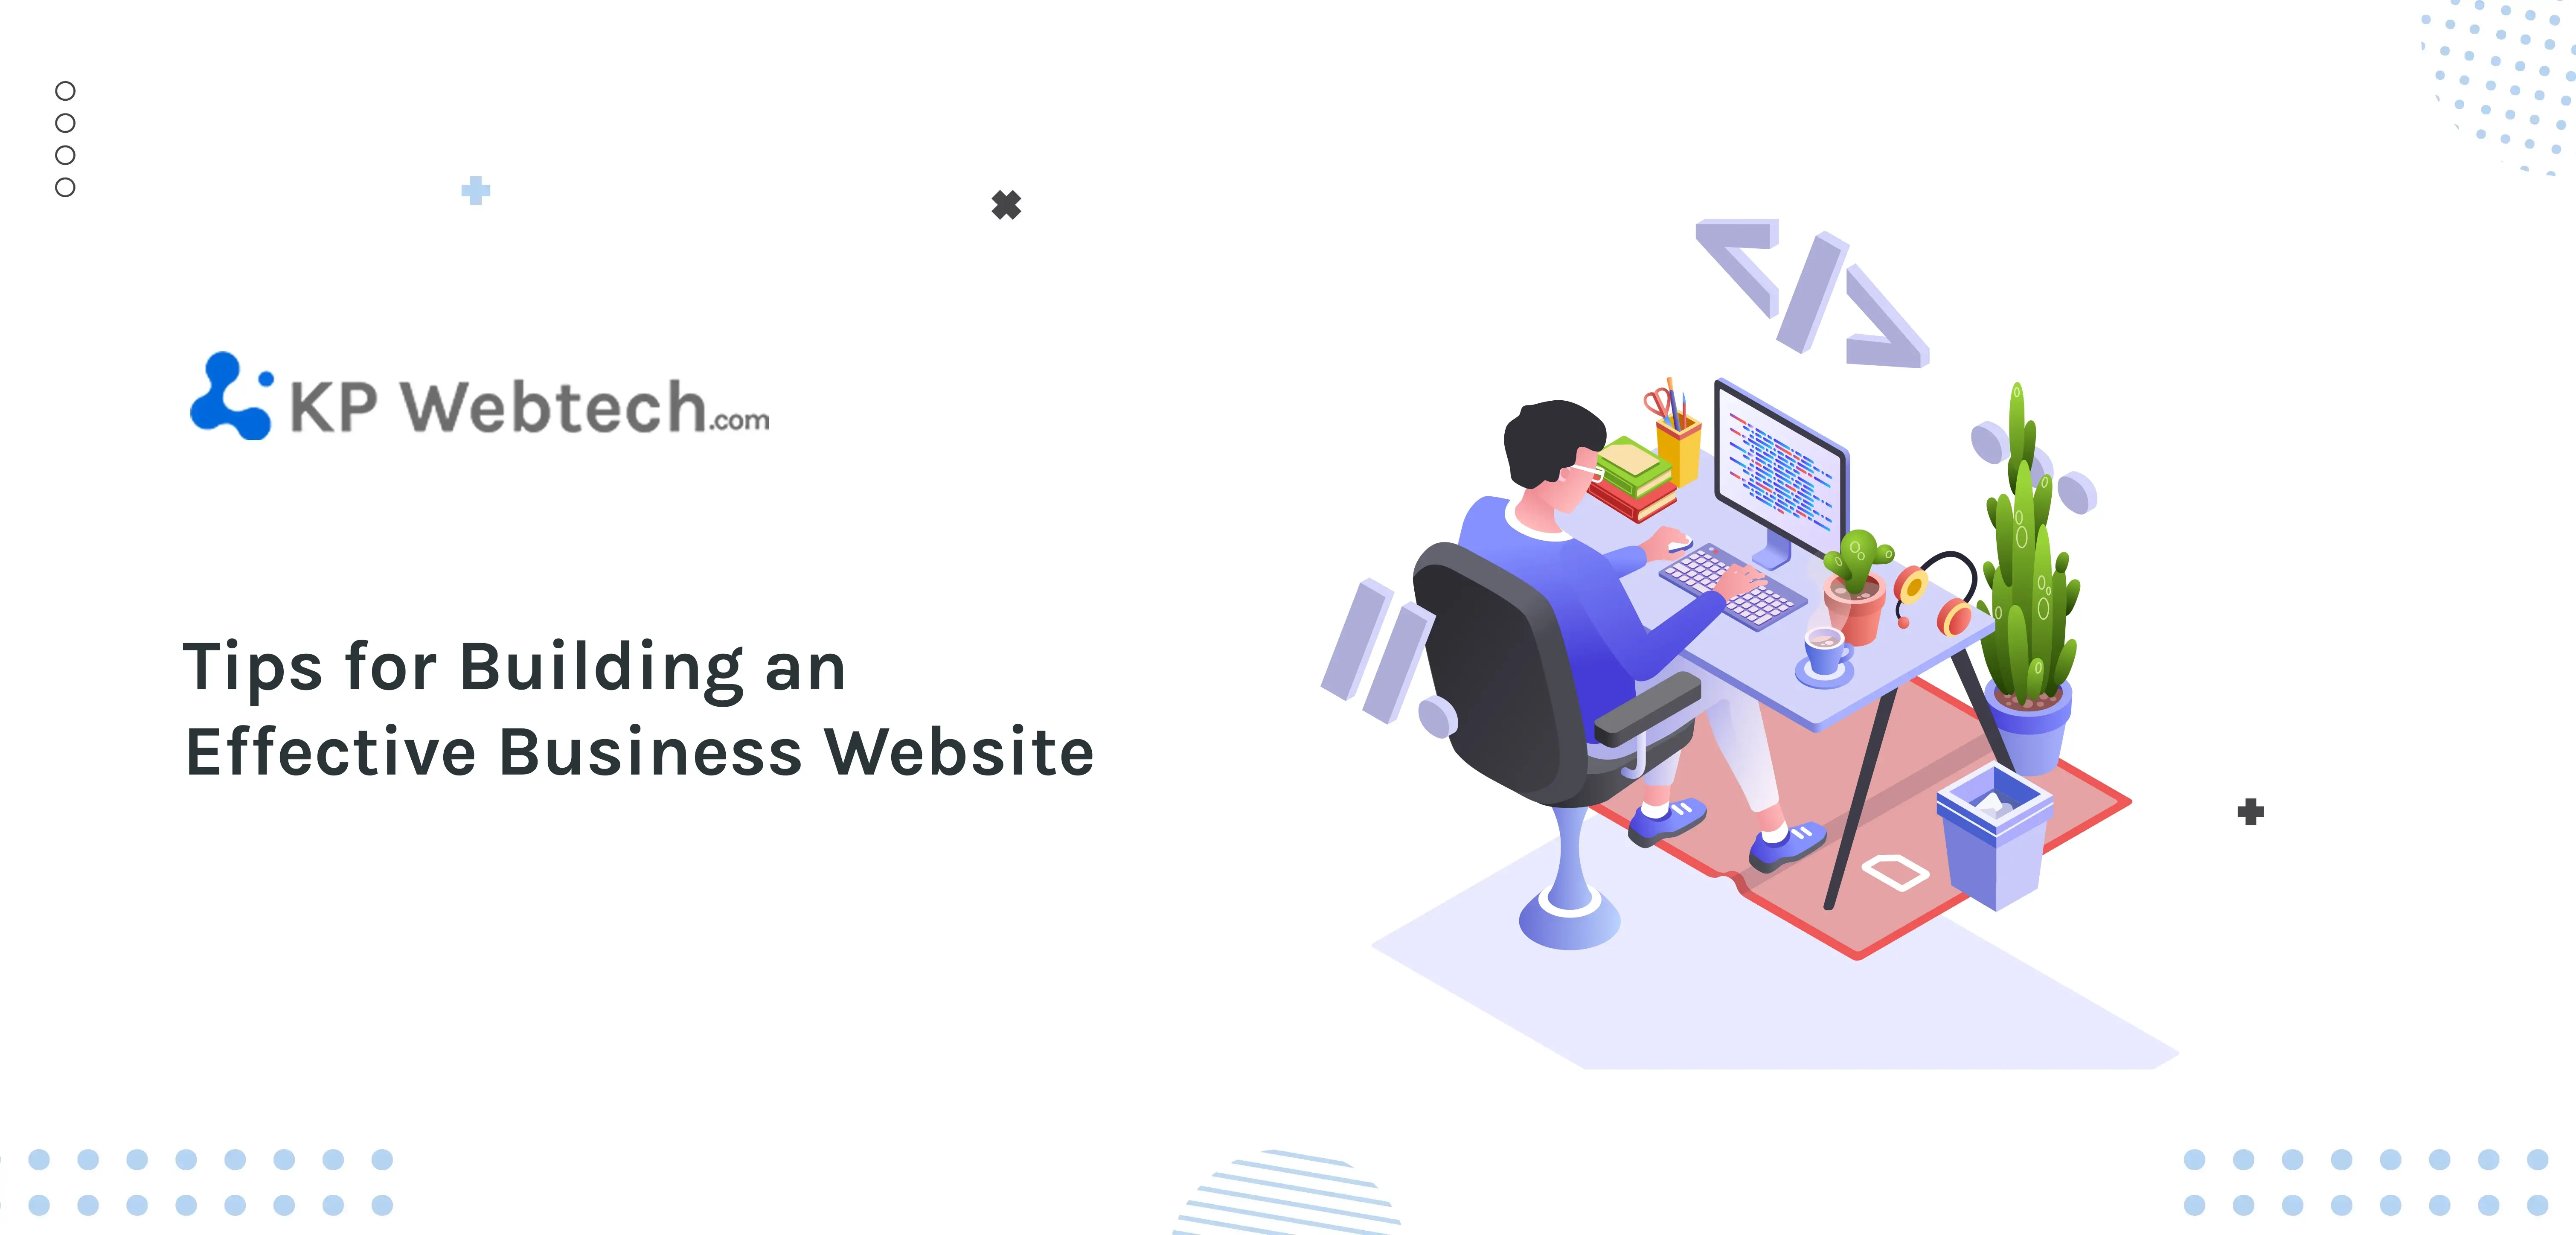 Tips for Building an Effective Business Website